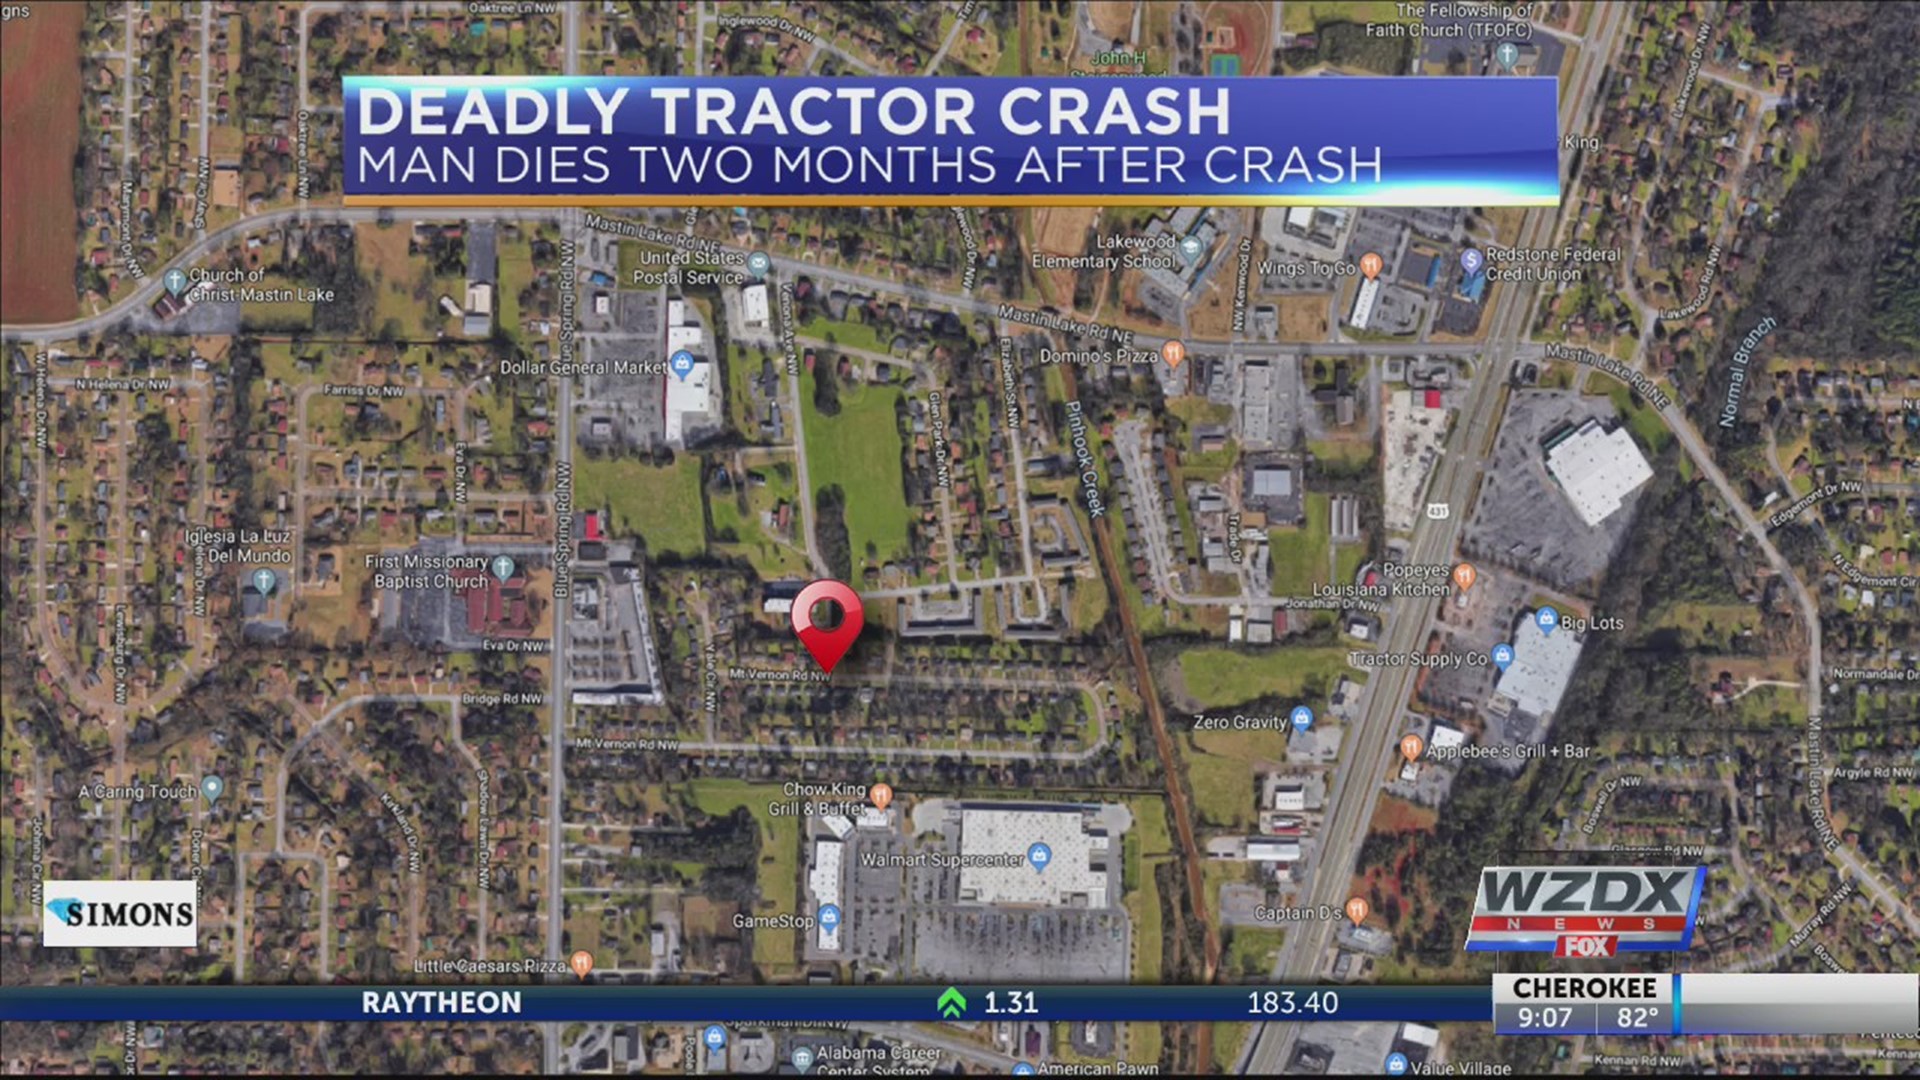 A man who was injured in a tractor crash two months ago has died from his injuries.